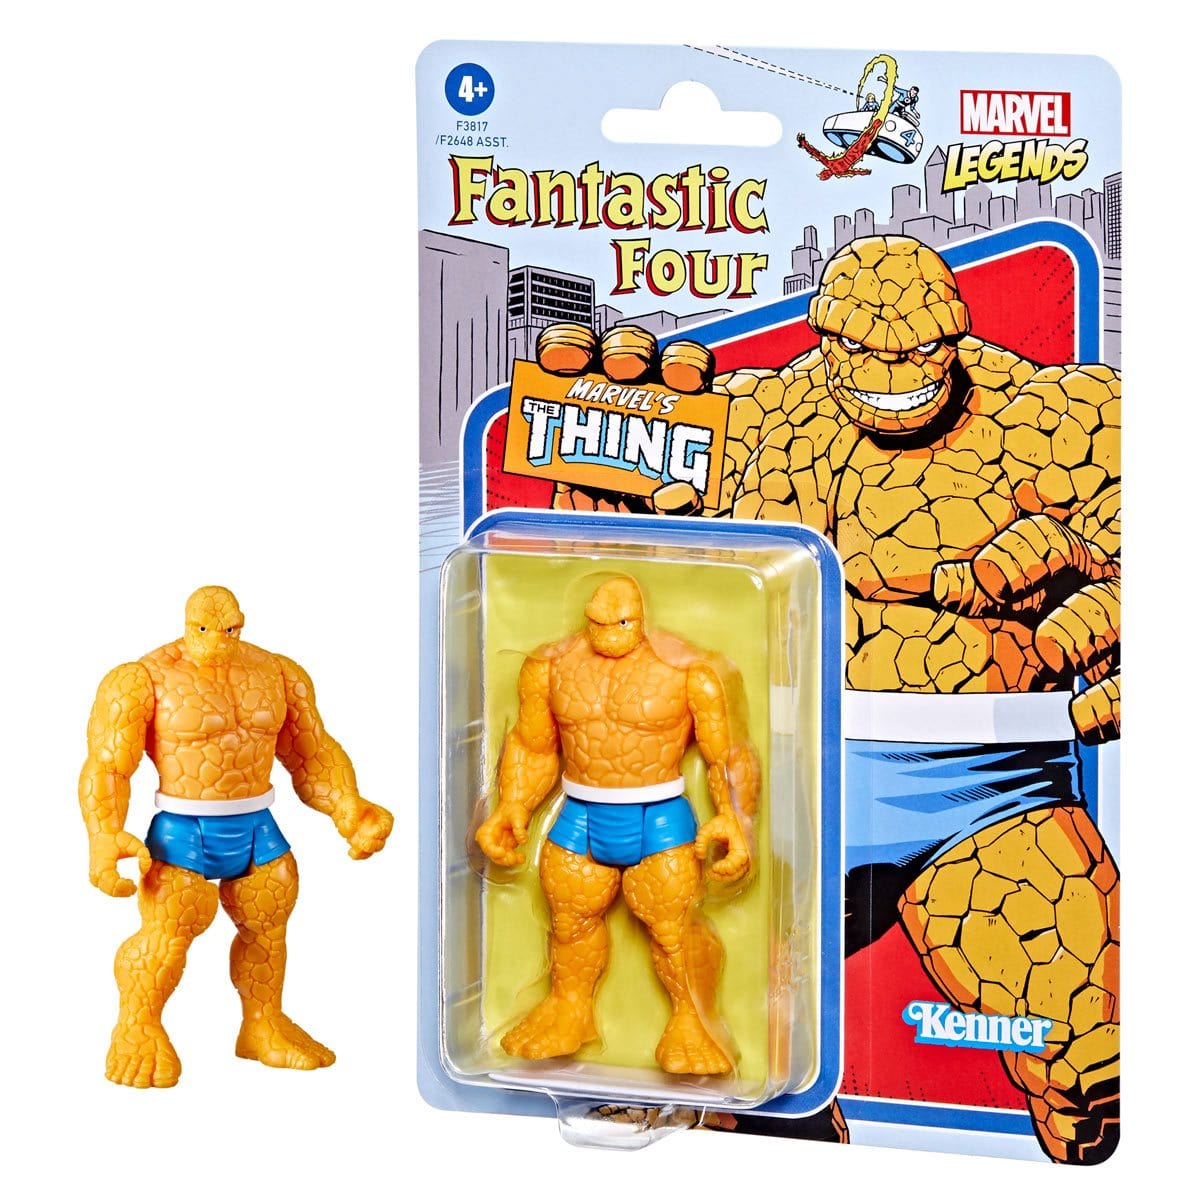 Marvel Legends Retro 375 Collection The Thing 3 3/4-Inch Action Figure Next to box and one in box